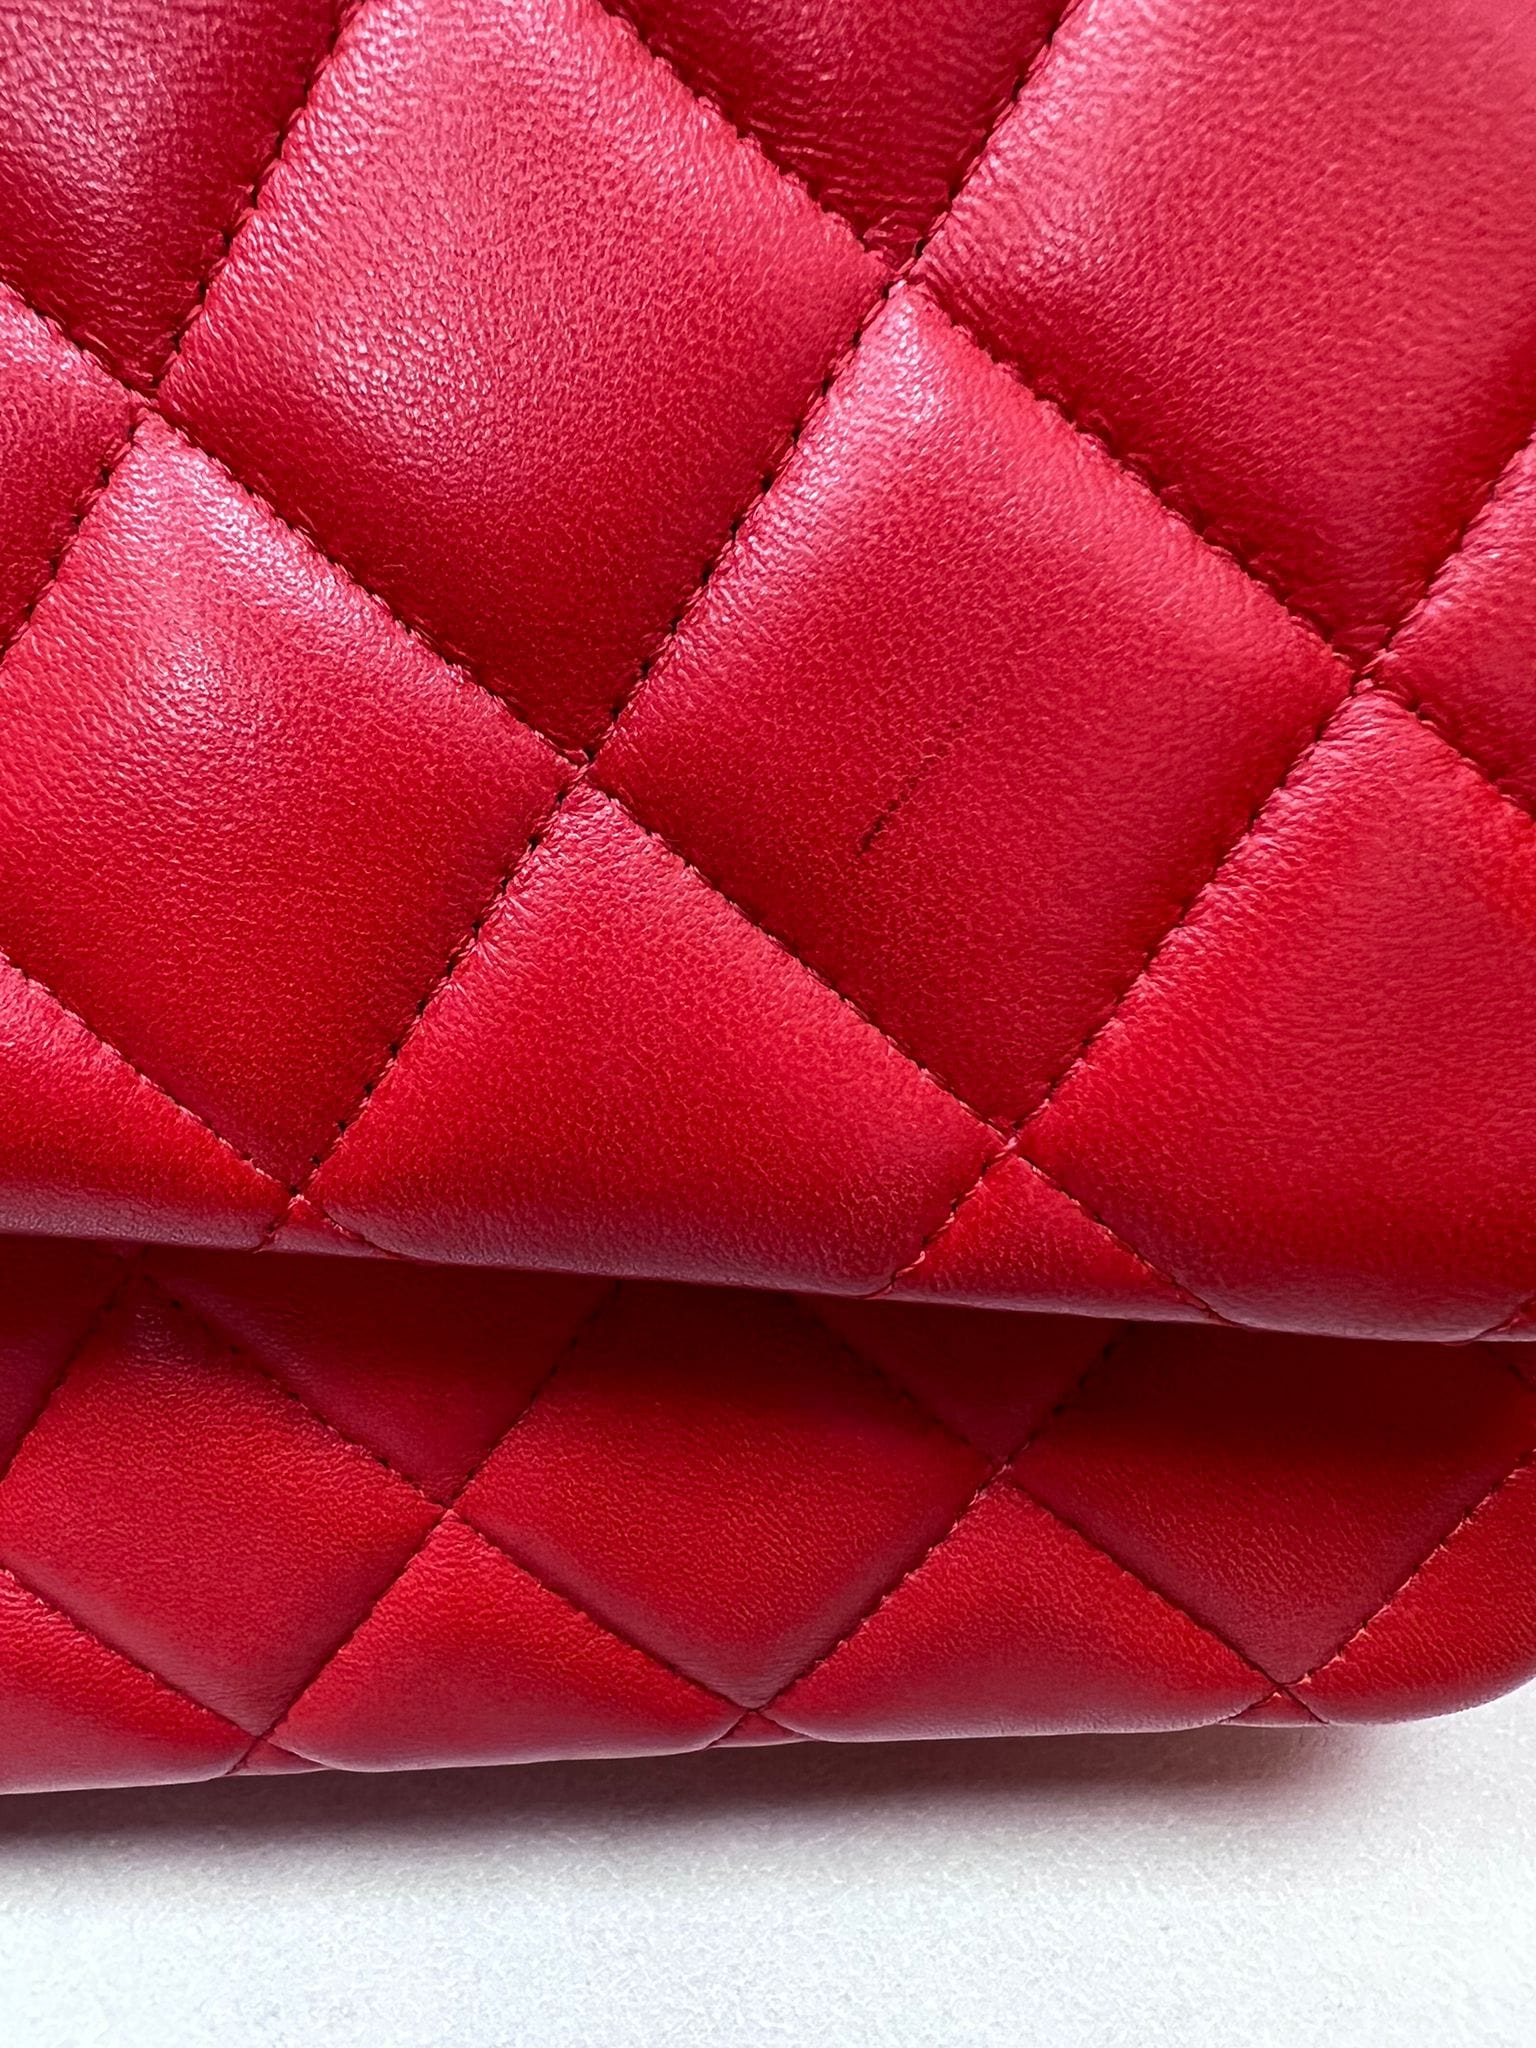 Chanel Chanel Lambskin Maxi Red SYL1077